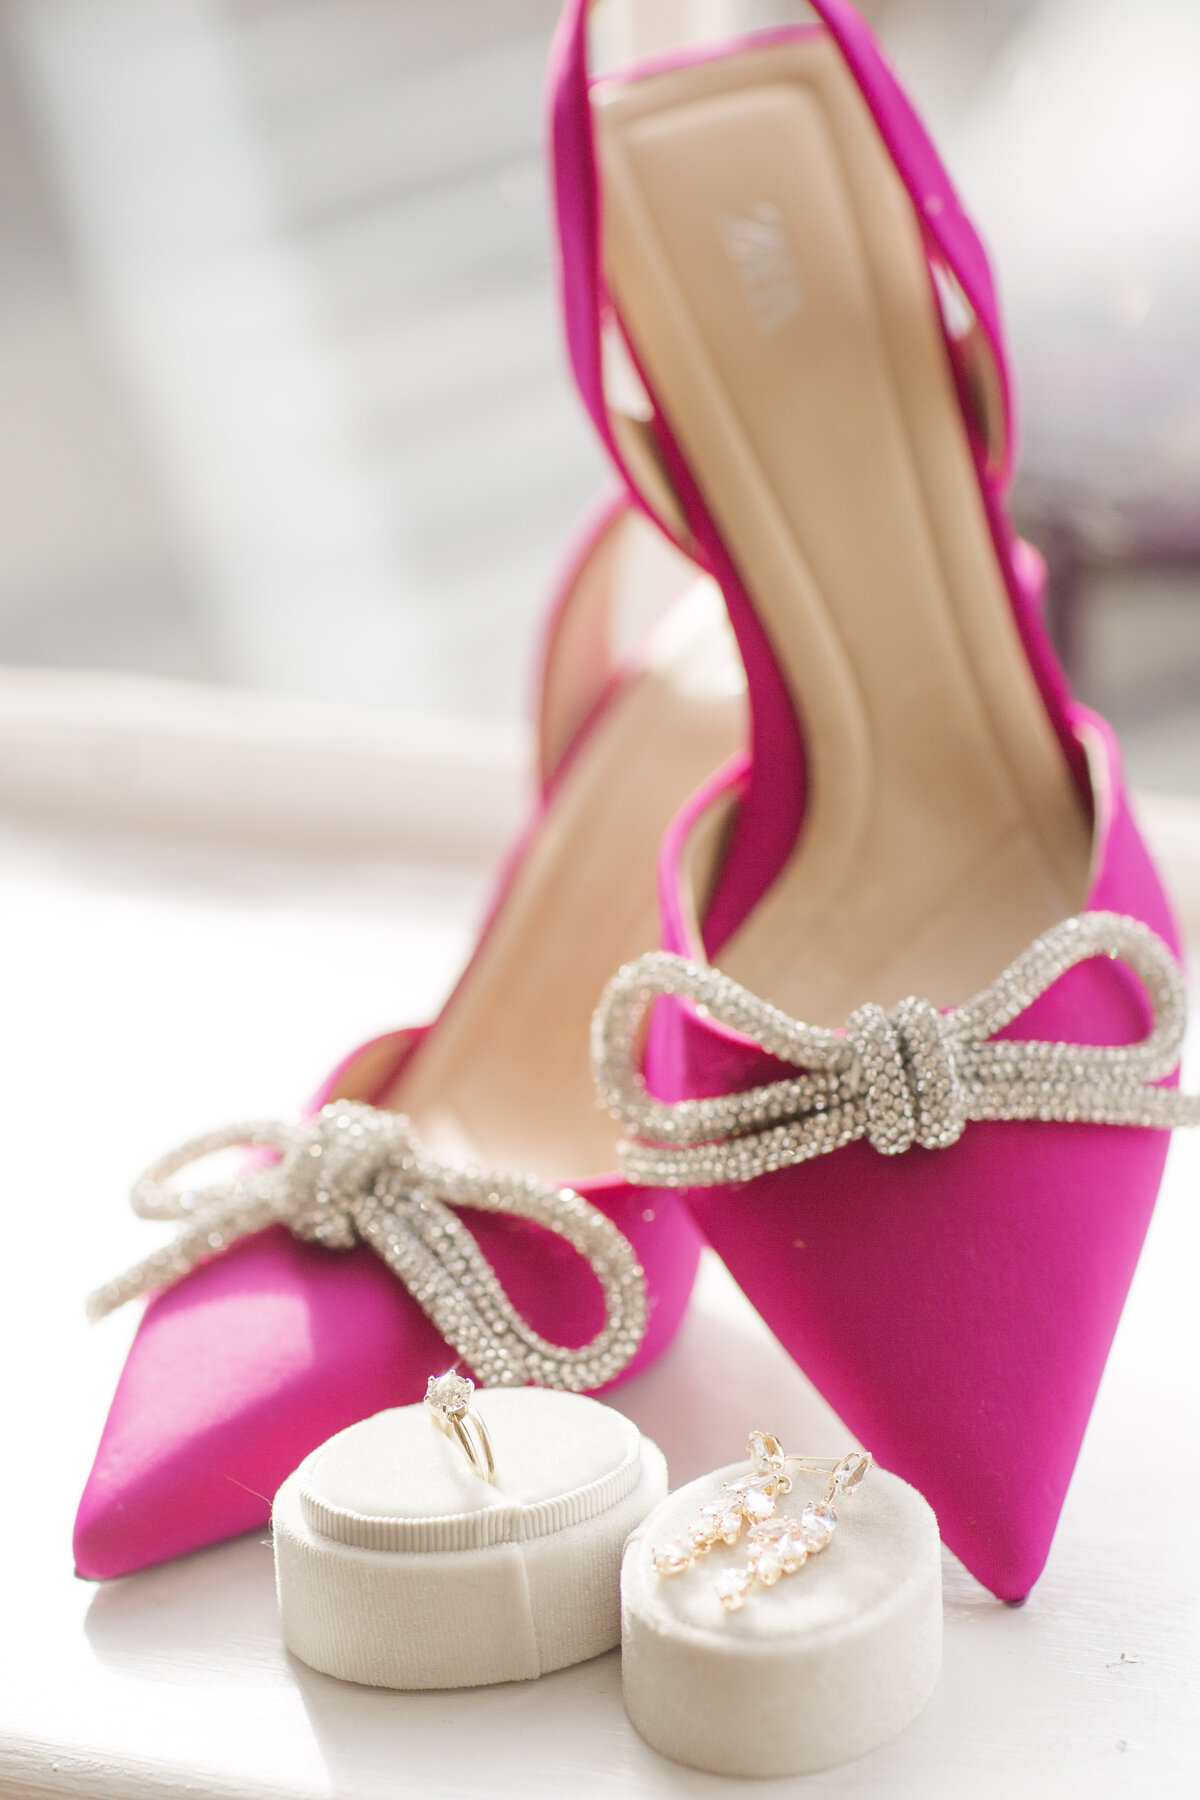 Bright pink shows with silver bows